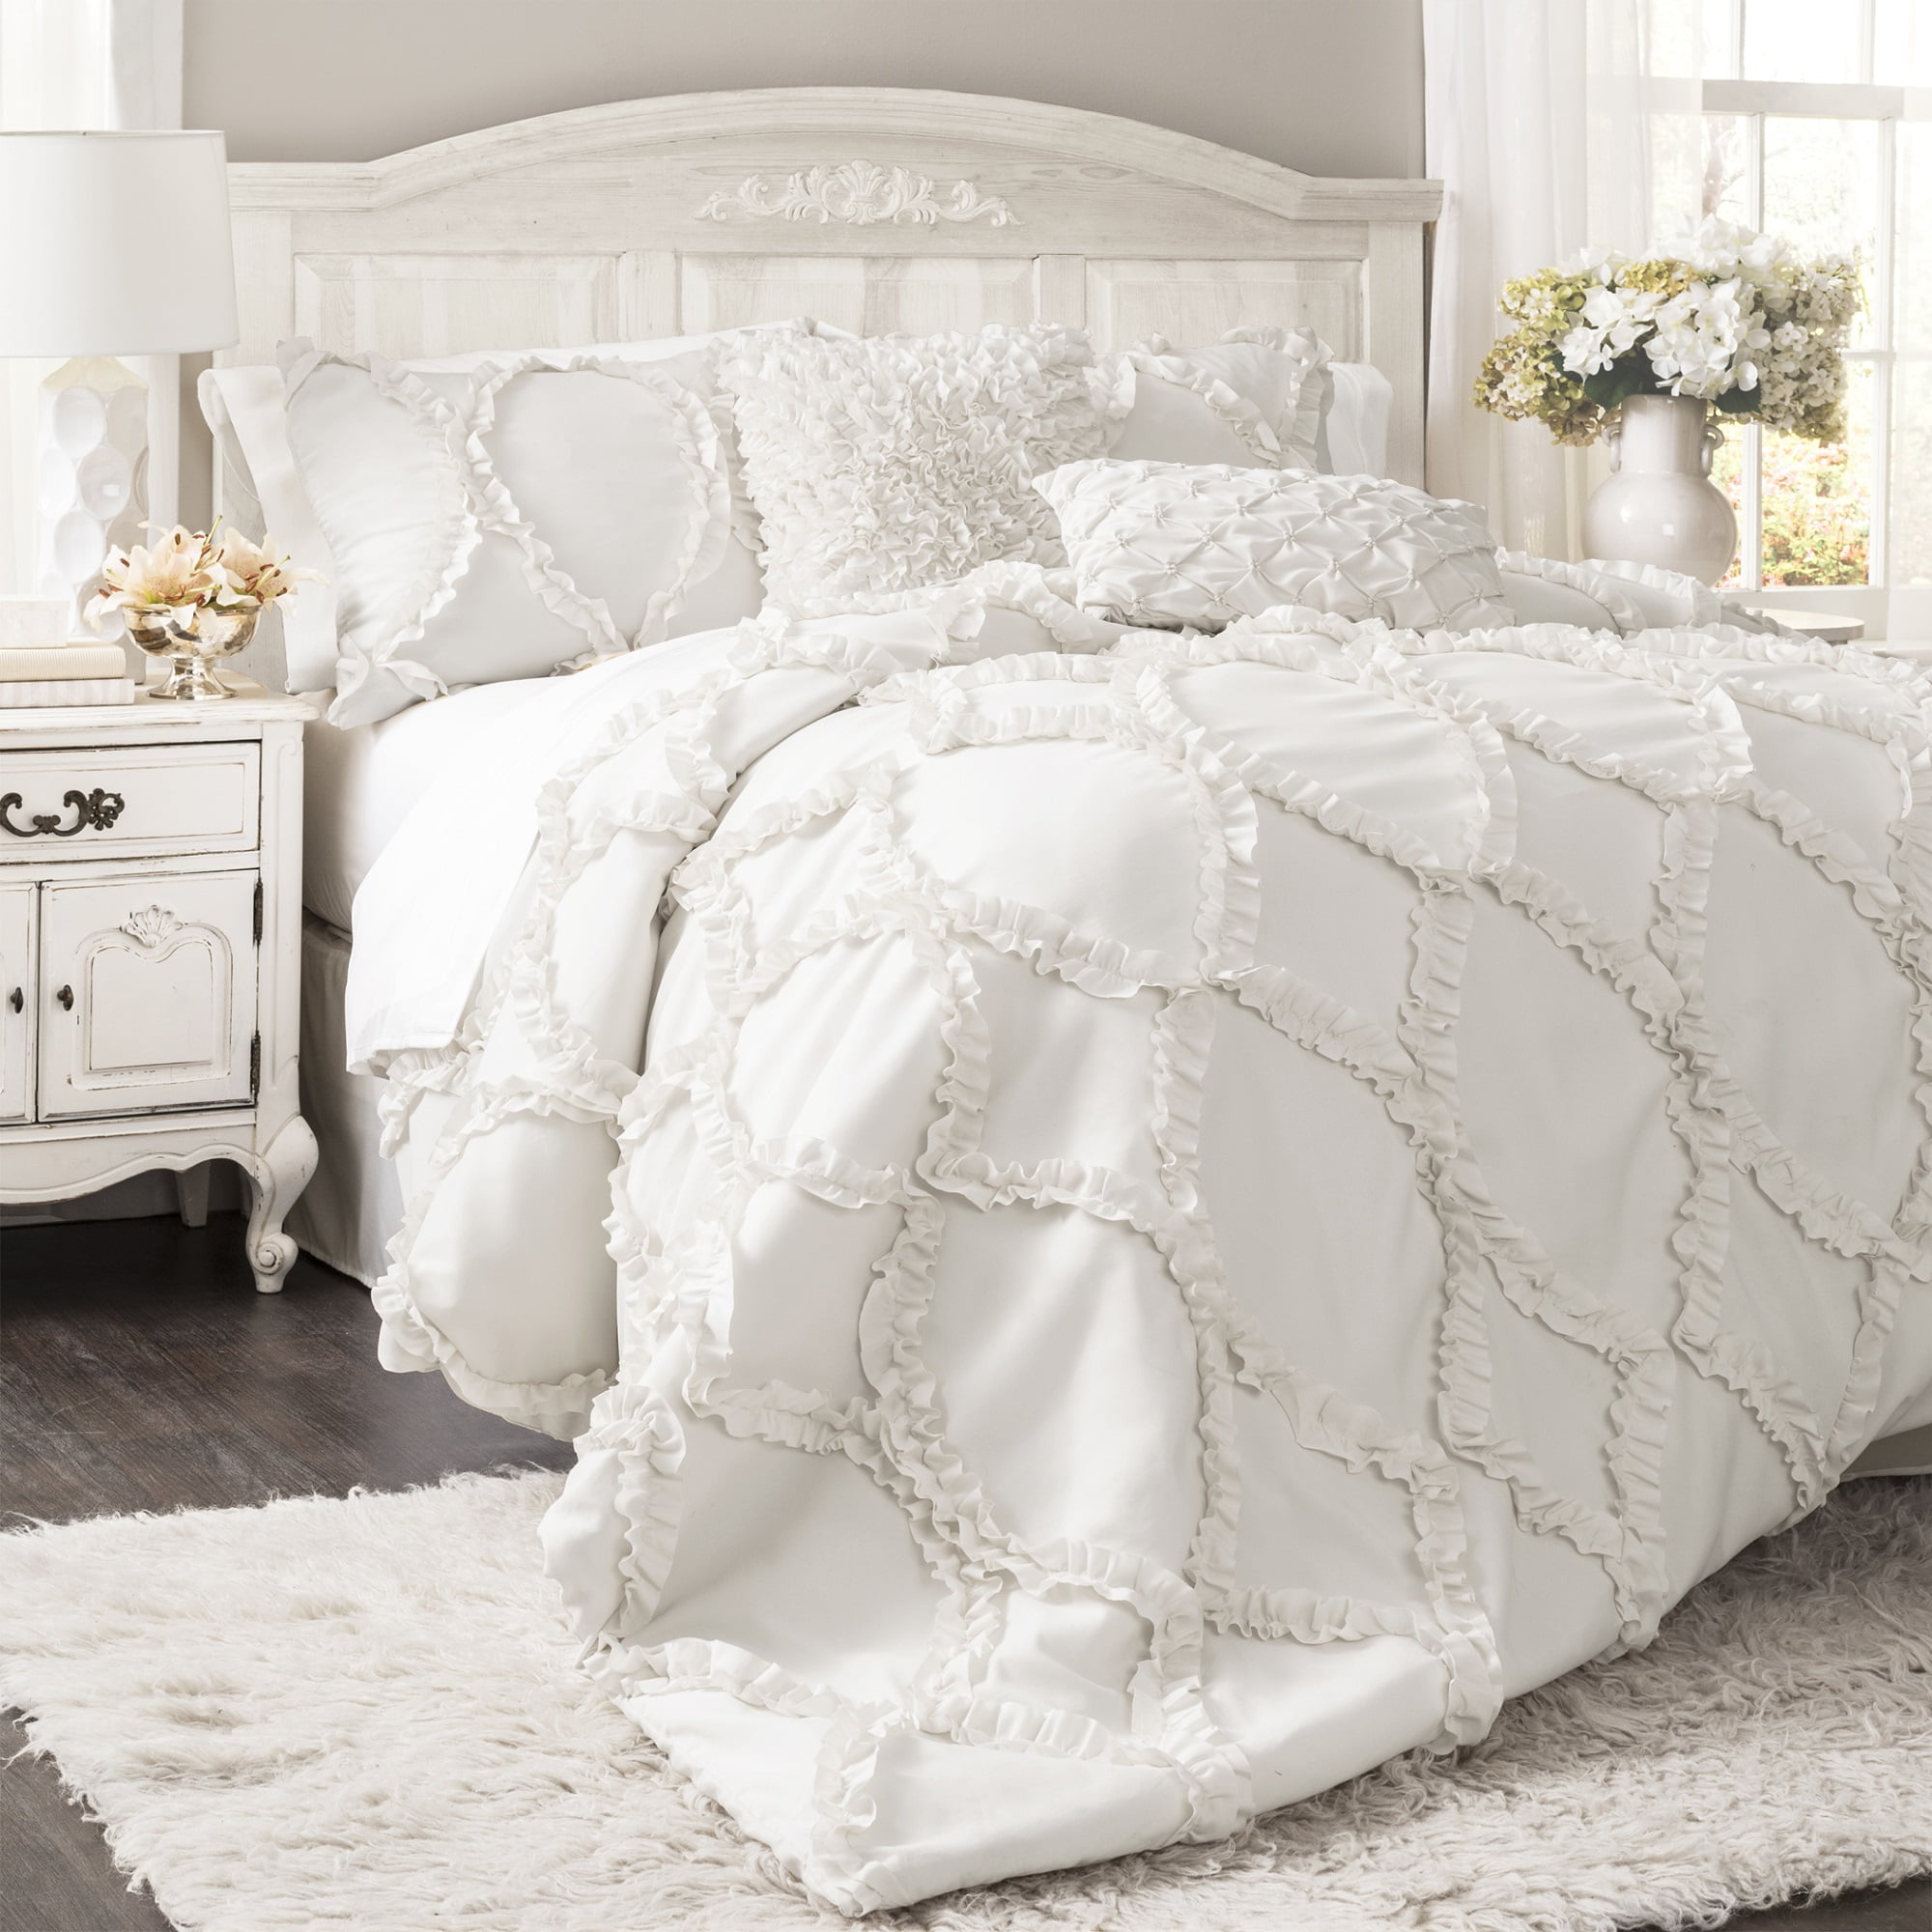 Hamptons Ruffle Shabby Frill Chic White Quilt Throw Bed Blanket Sofa Quilt New 